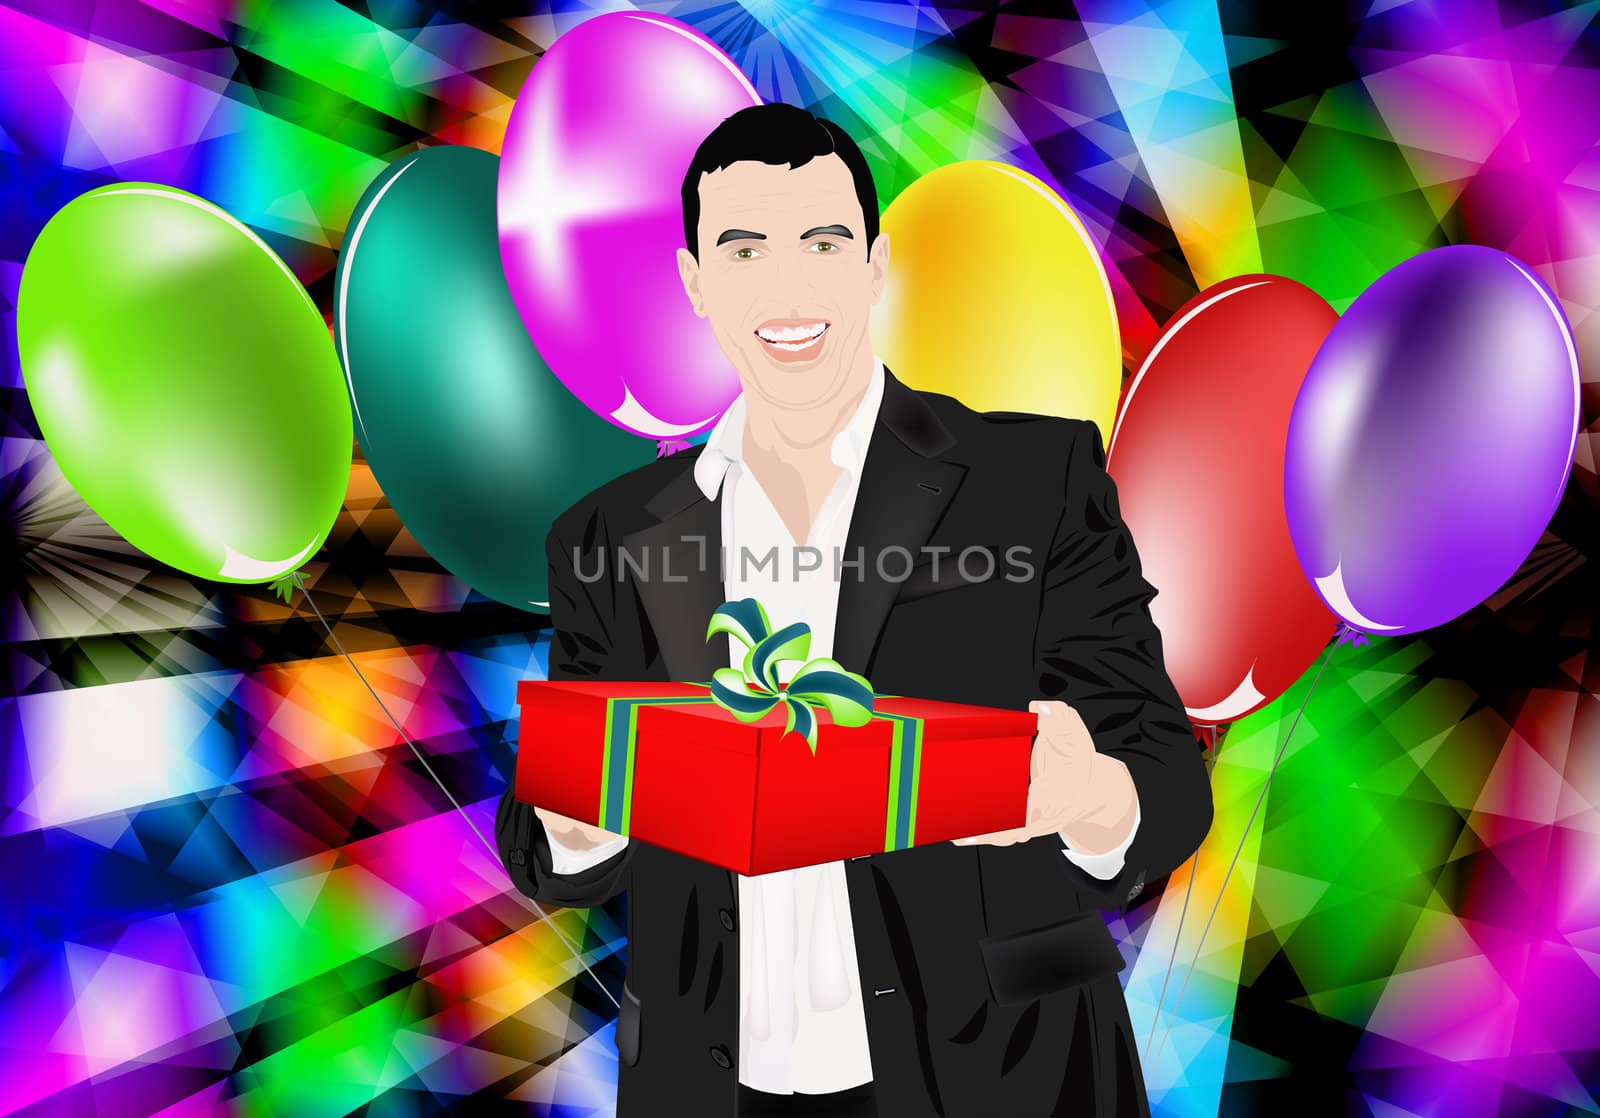 The elegant man gives a celebratory gift with a smile